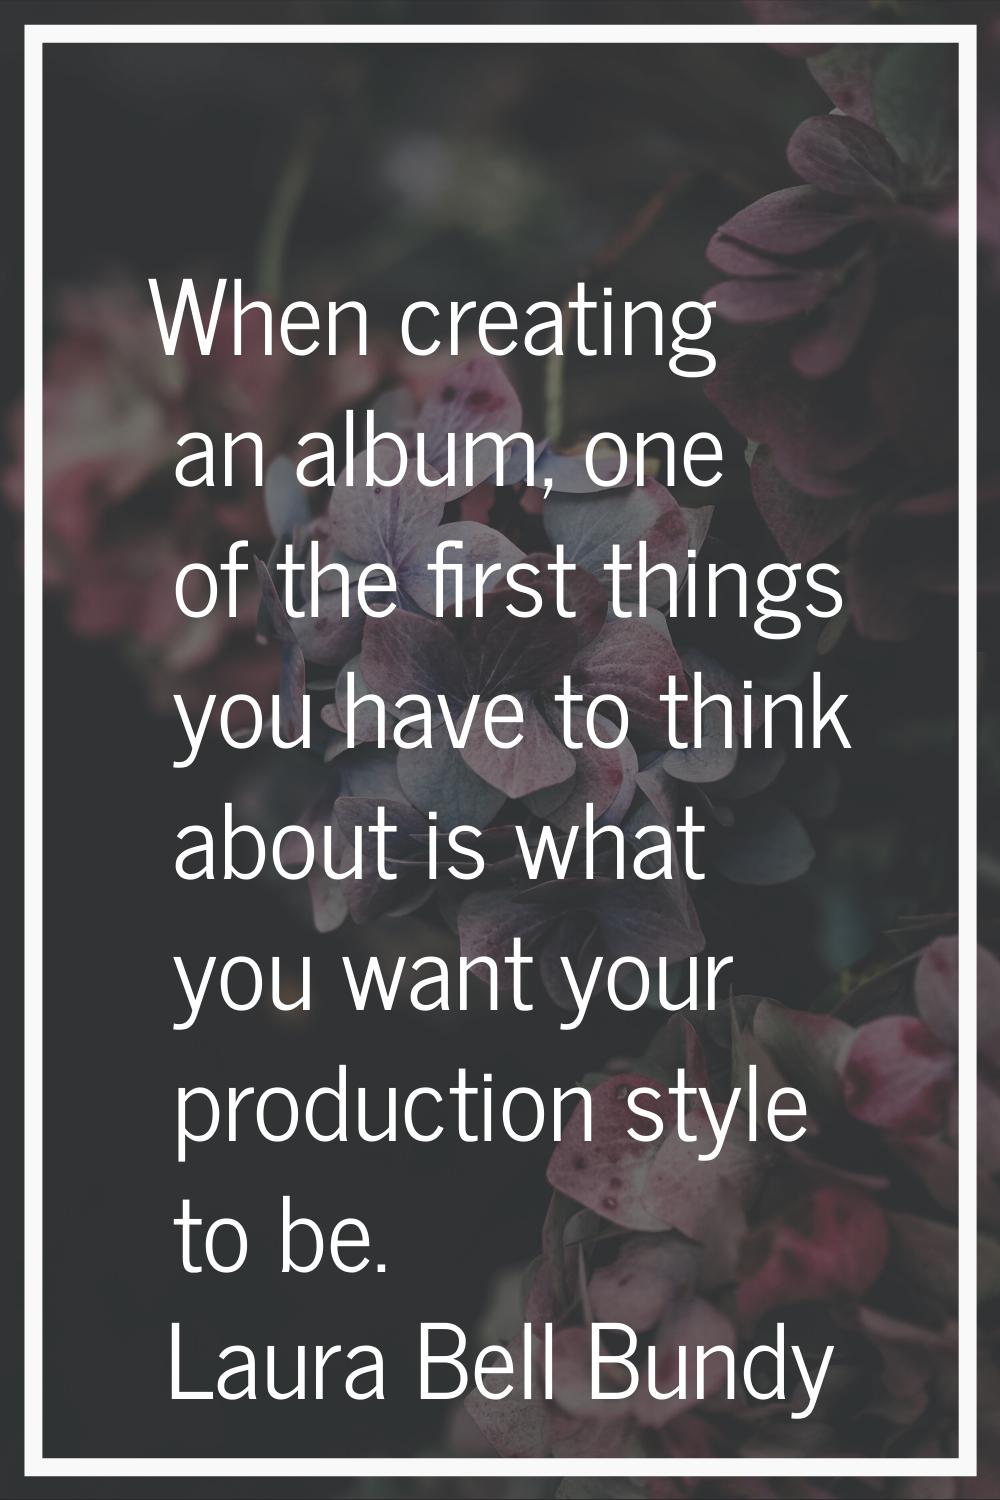 When creating an album, one of the first things you have to think about is what you want your produ